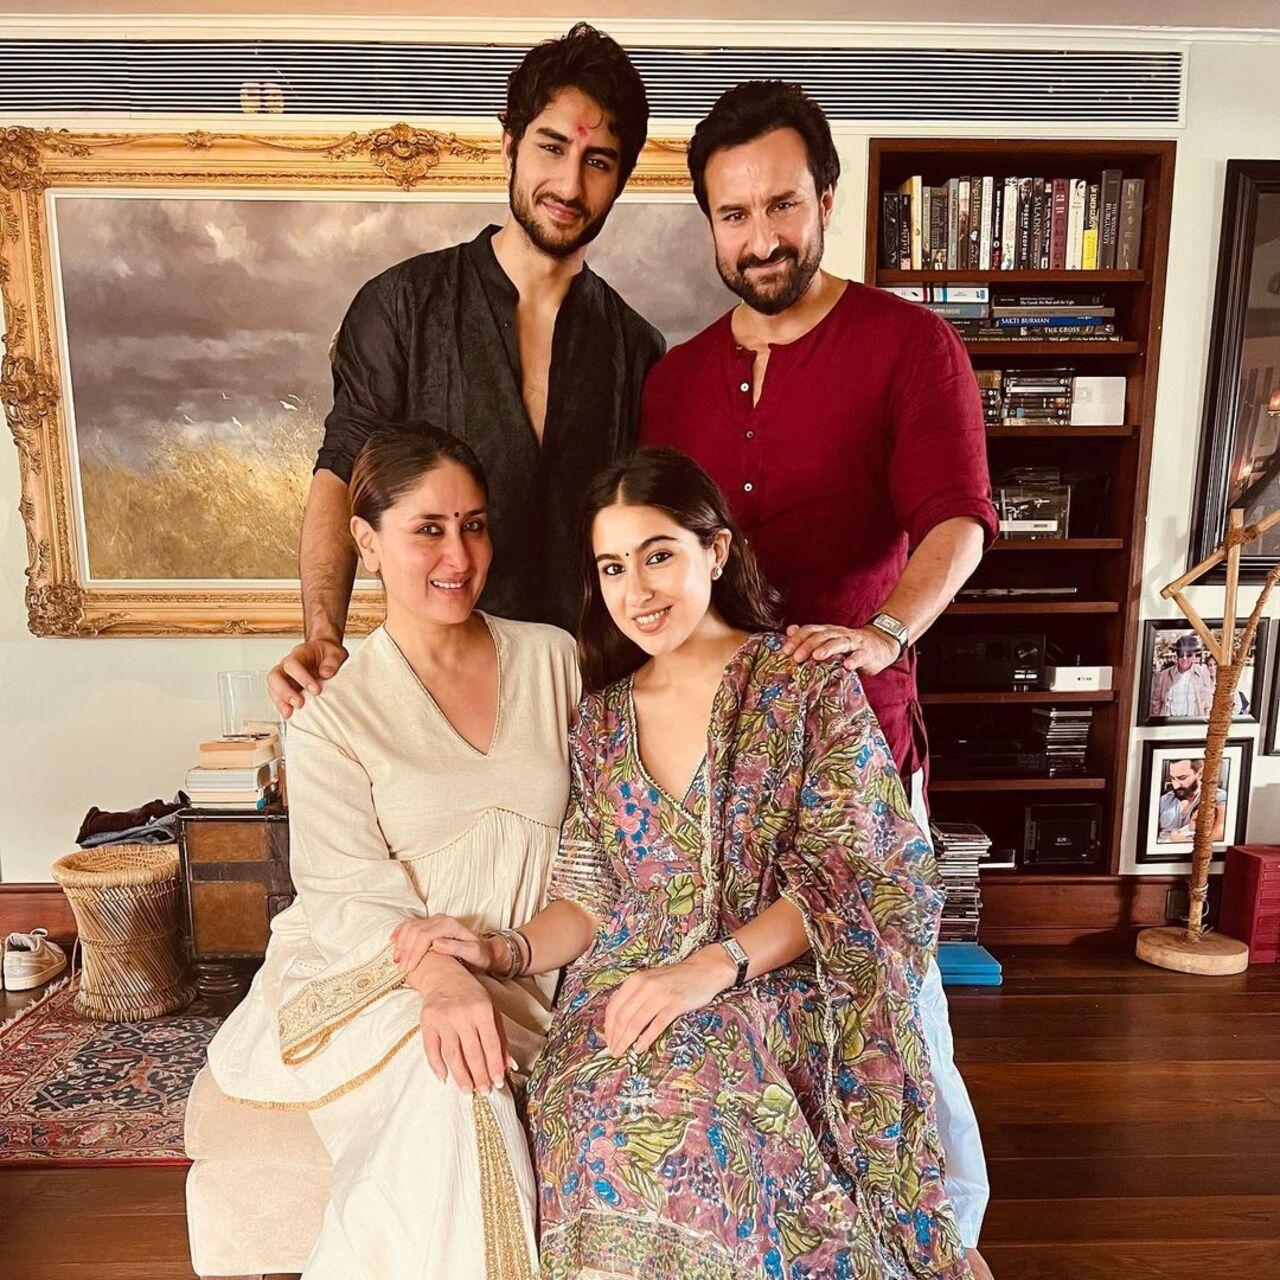 Sara Ali Khan and Ibrahim Ali Khan are Saif Ali Khan's kids from his first marriage to Amrita Singh. Here they are seen posing with Kareena Kapoor Khan, who is Saif's second wife